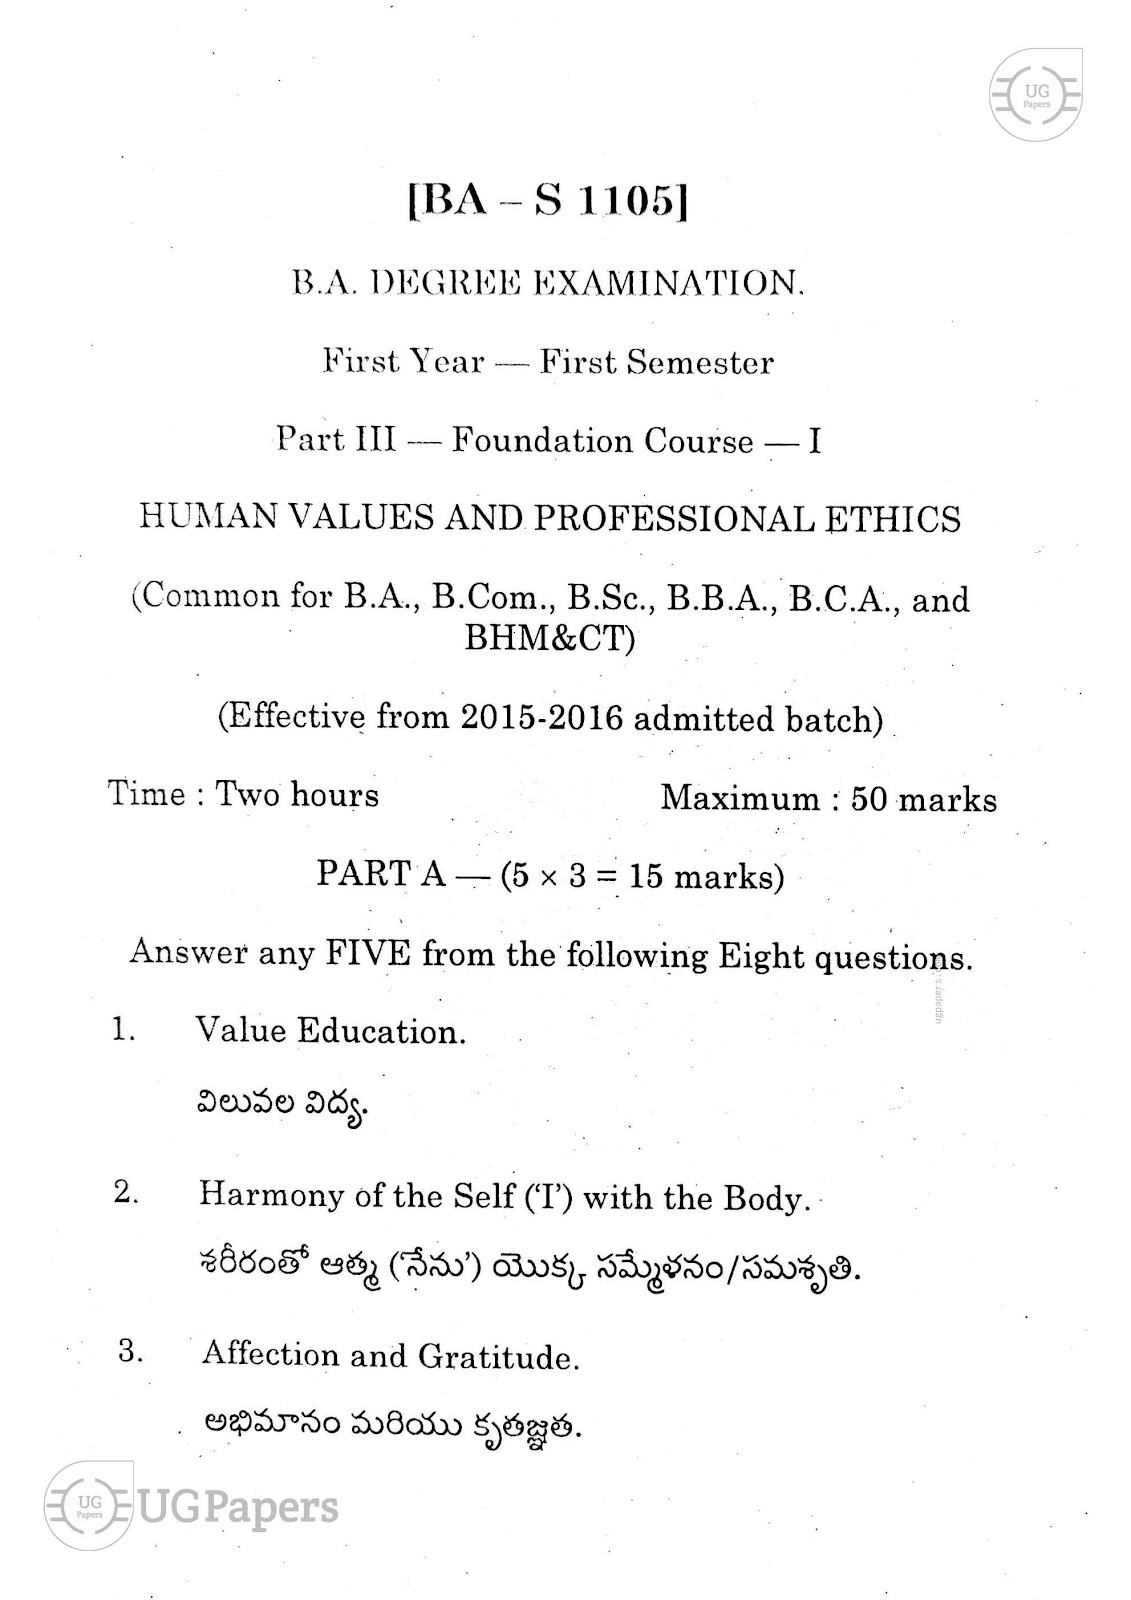 ugpapers.com, Andhra University, Semester 1, Human Values and Professional Ethics 2019